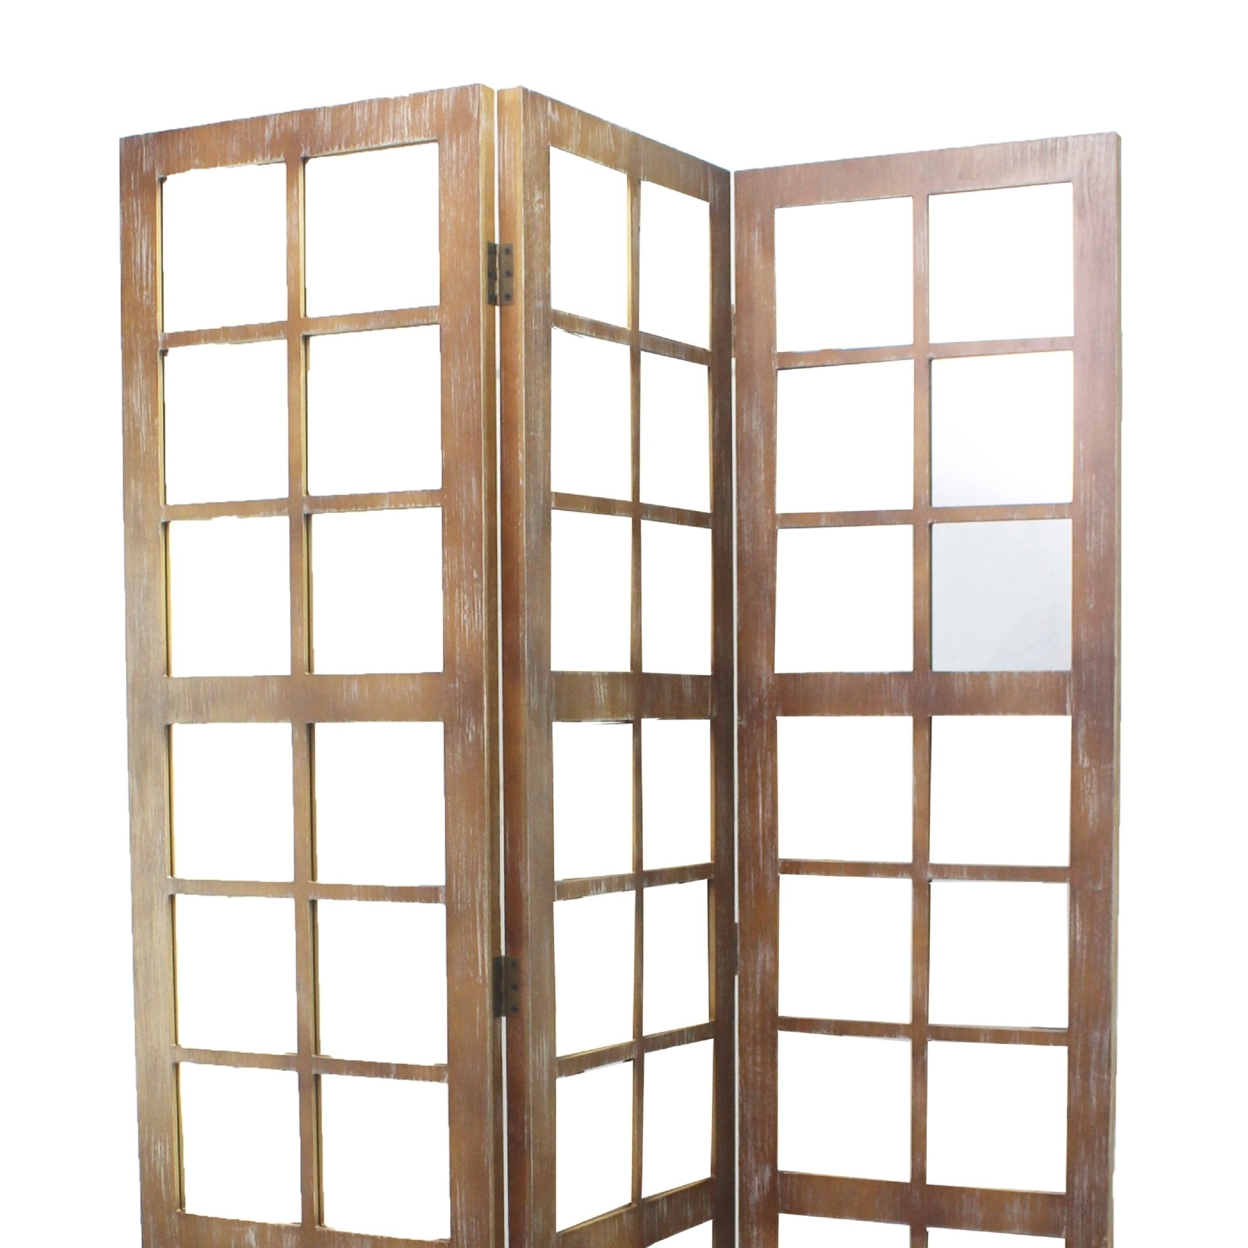 3 Panel Wooden Screen With Square Mirror Inserts, Brown And Silver- Saltoro Sherpi